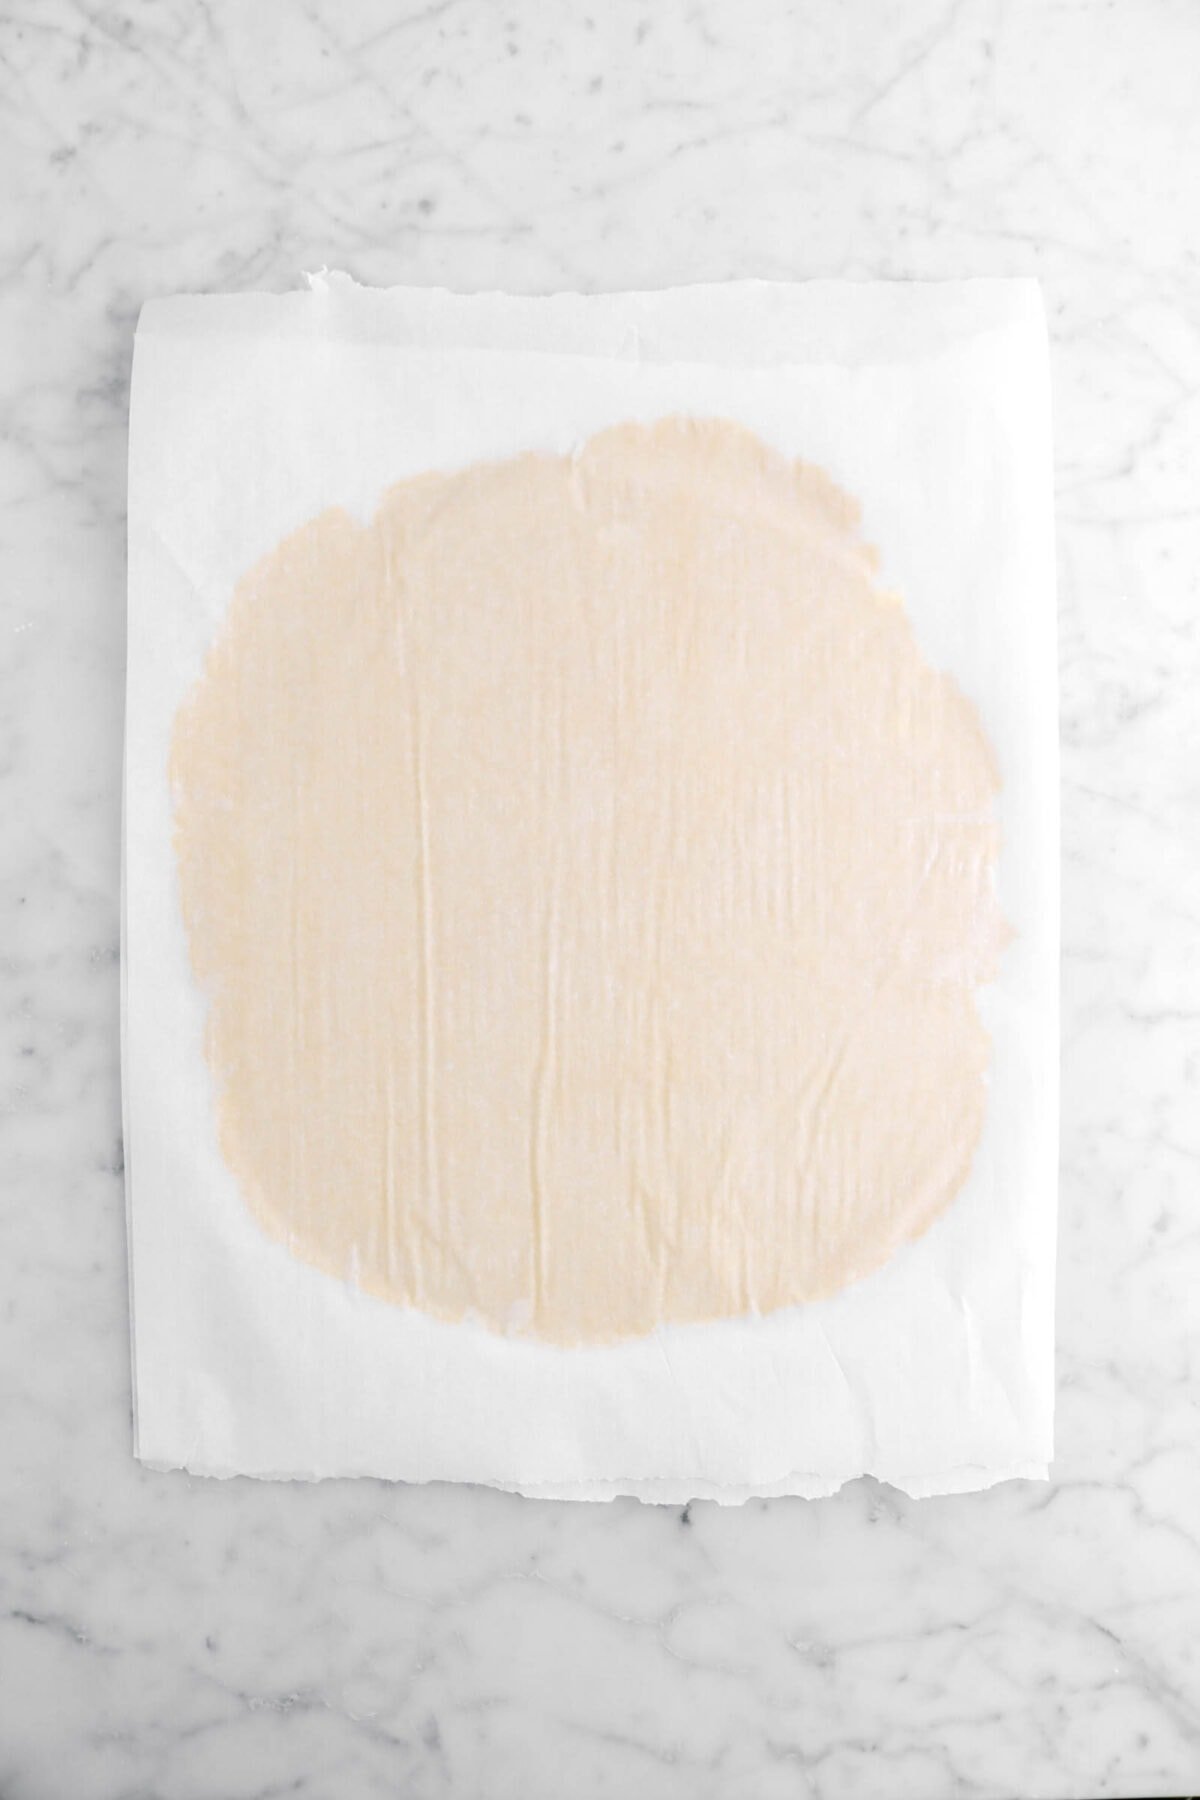 pie dough rolled out in between two sheets of parchment paper.